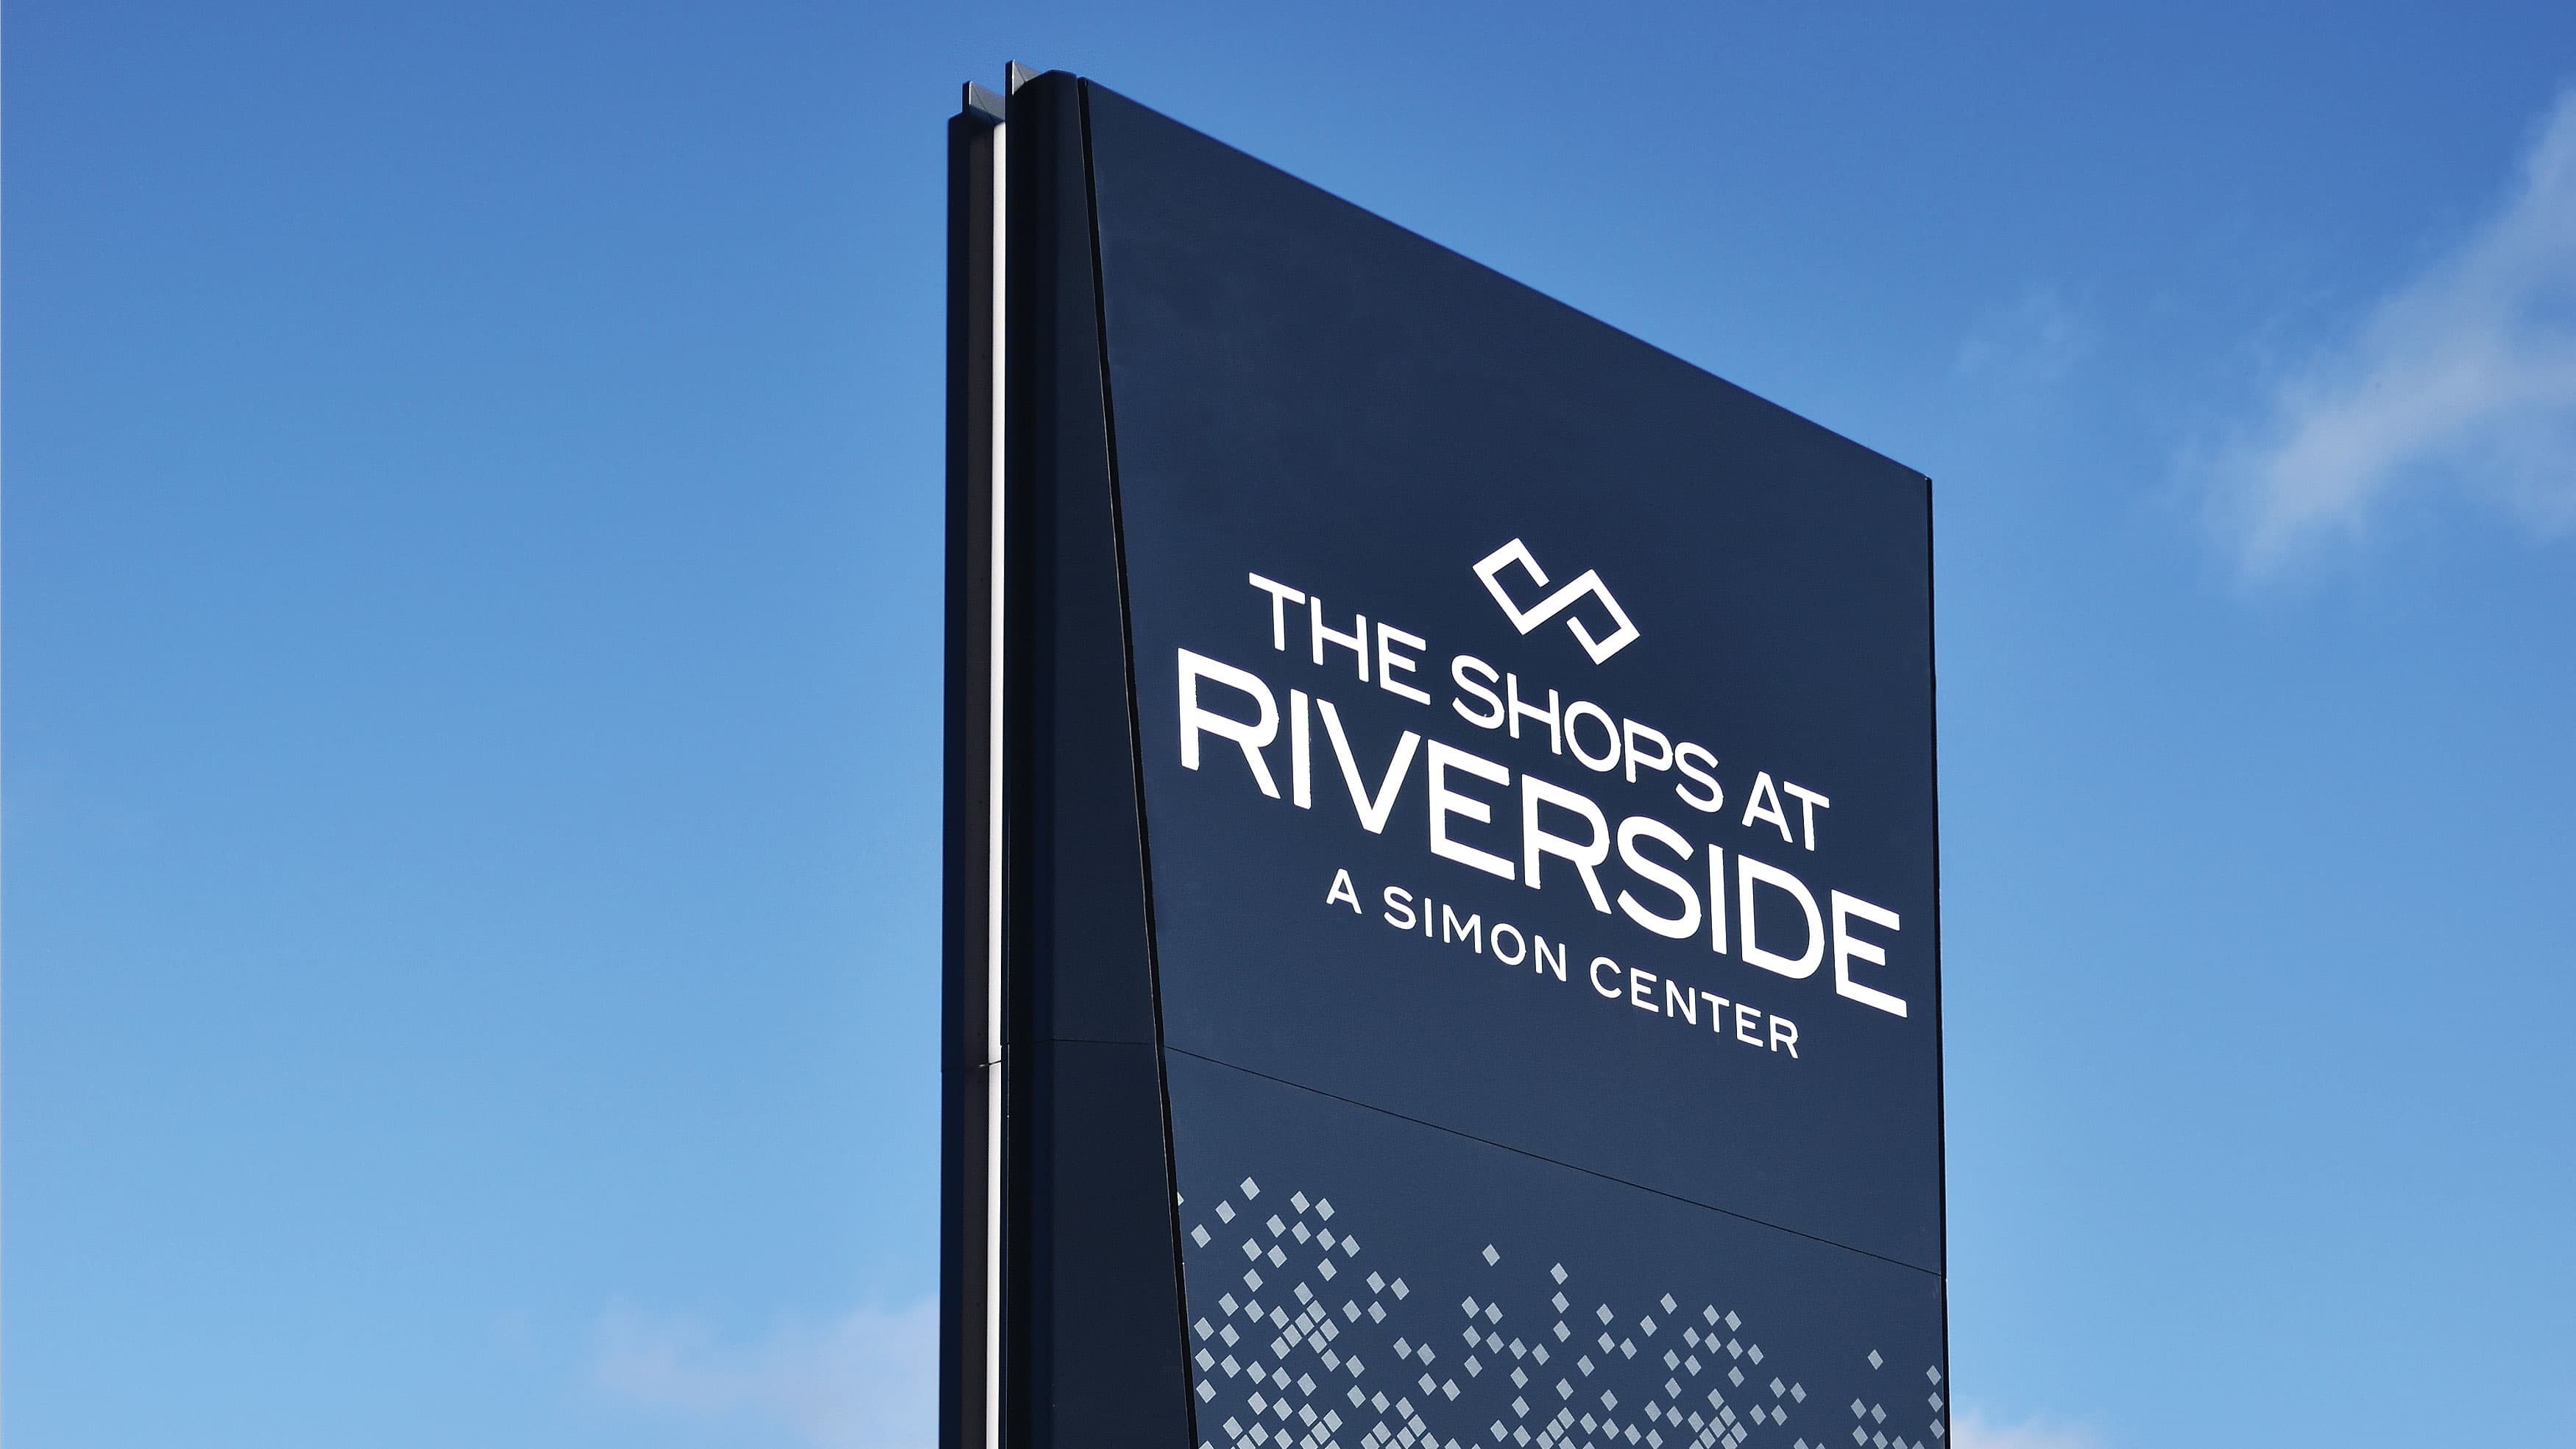 Exterior sign at the Shops at Riverside mall in New Jersey.